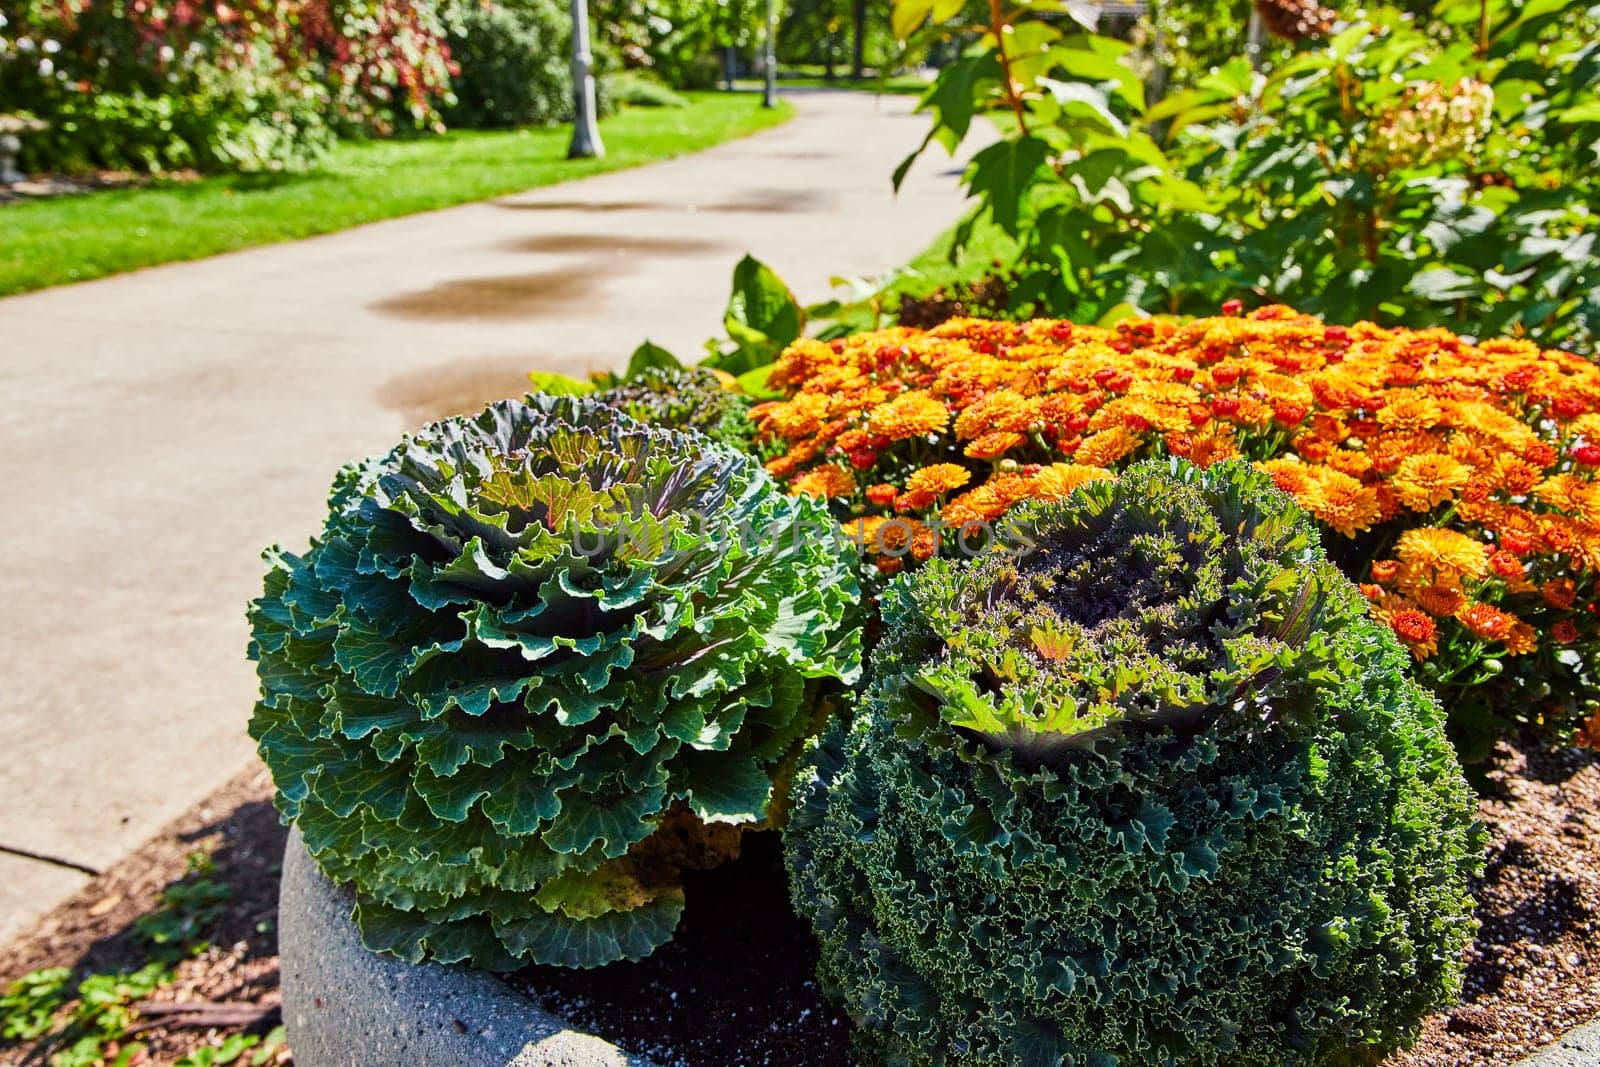 Vibrant ornamental cabbages and orange chrysanthemums in a serene public garden in Elkhart, Indiana, 2023